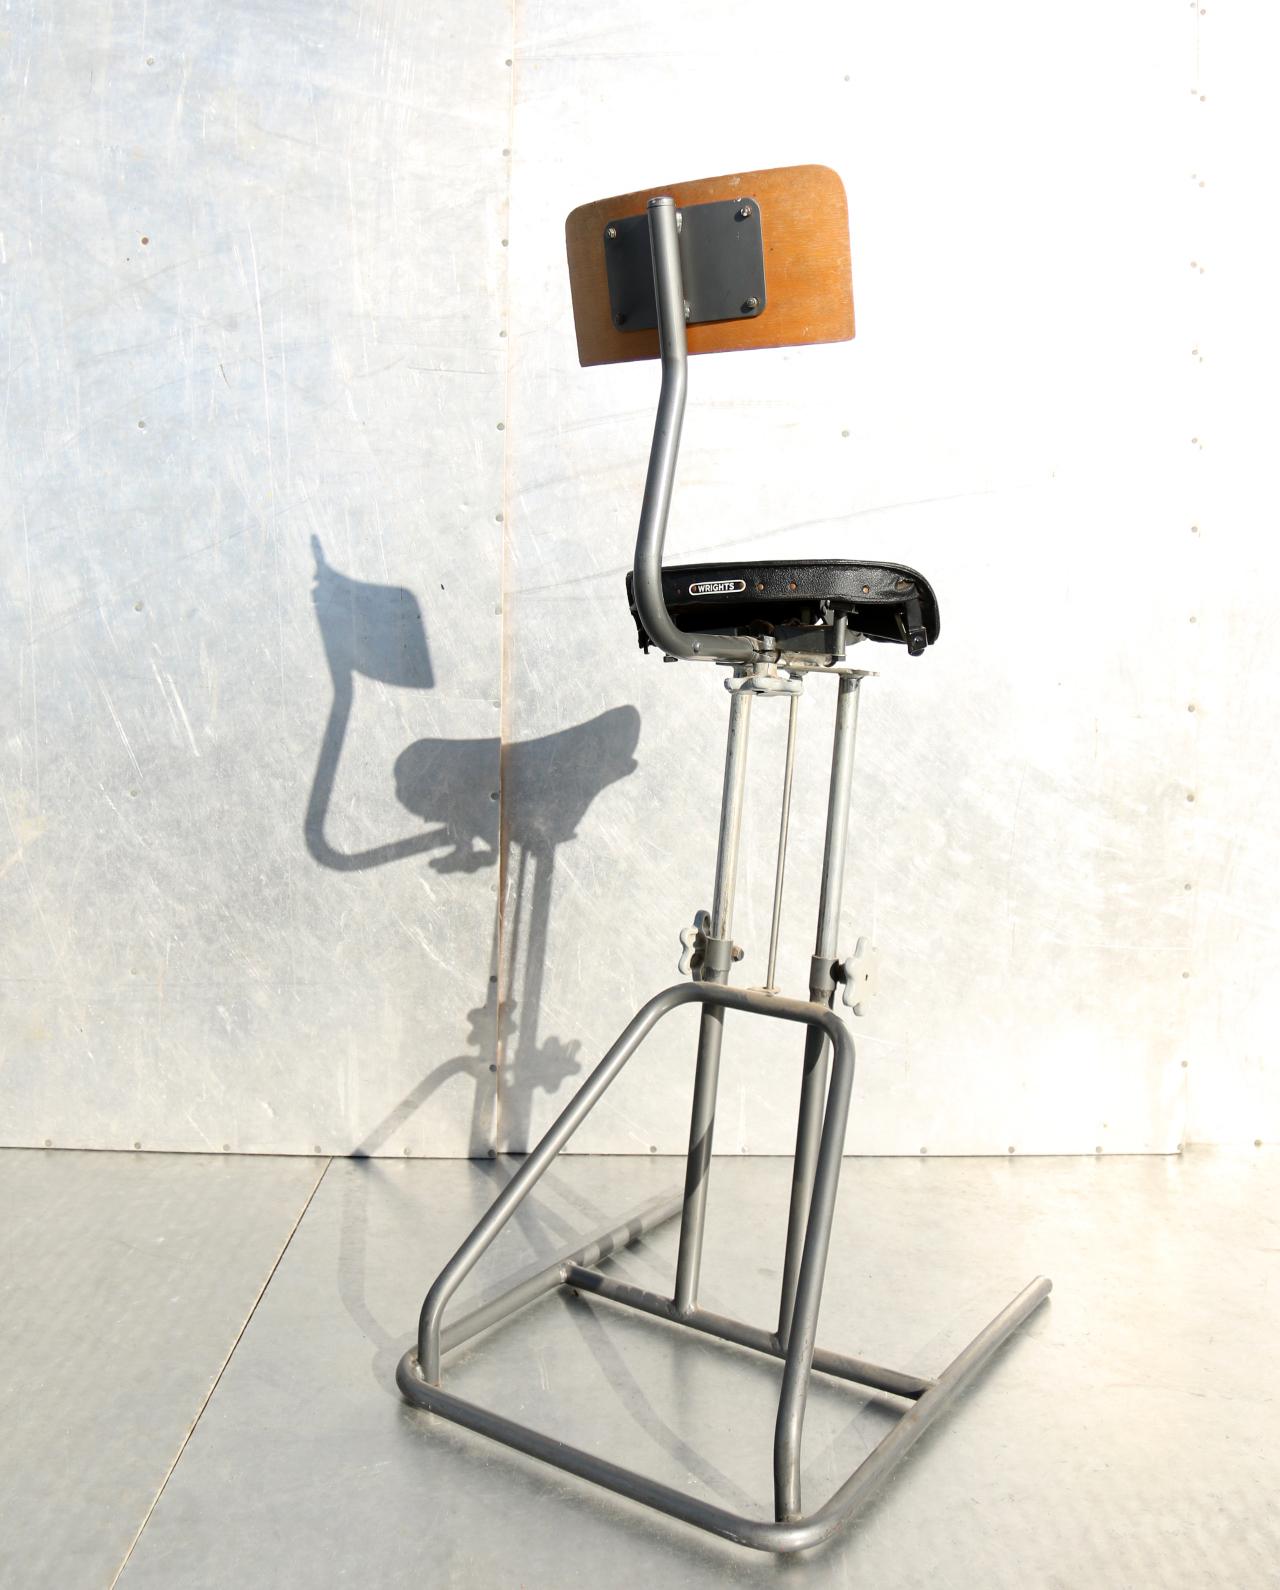 English Industrial Design, Wrights Bicycle Seat, Stool, Studio Chair